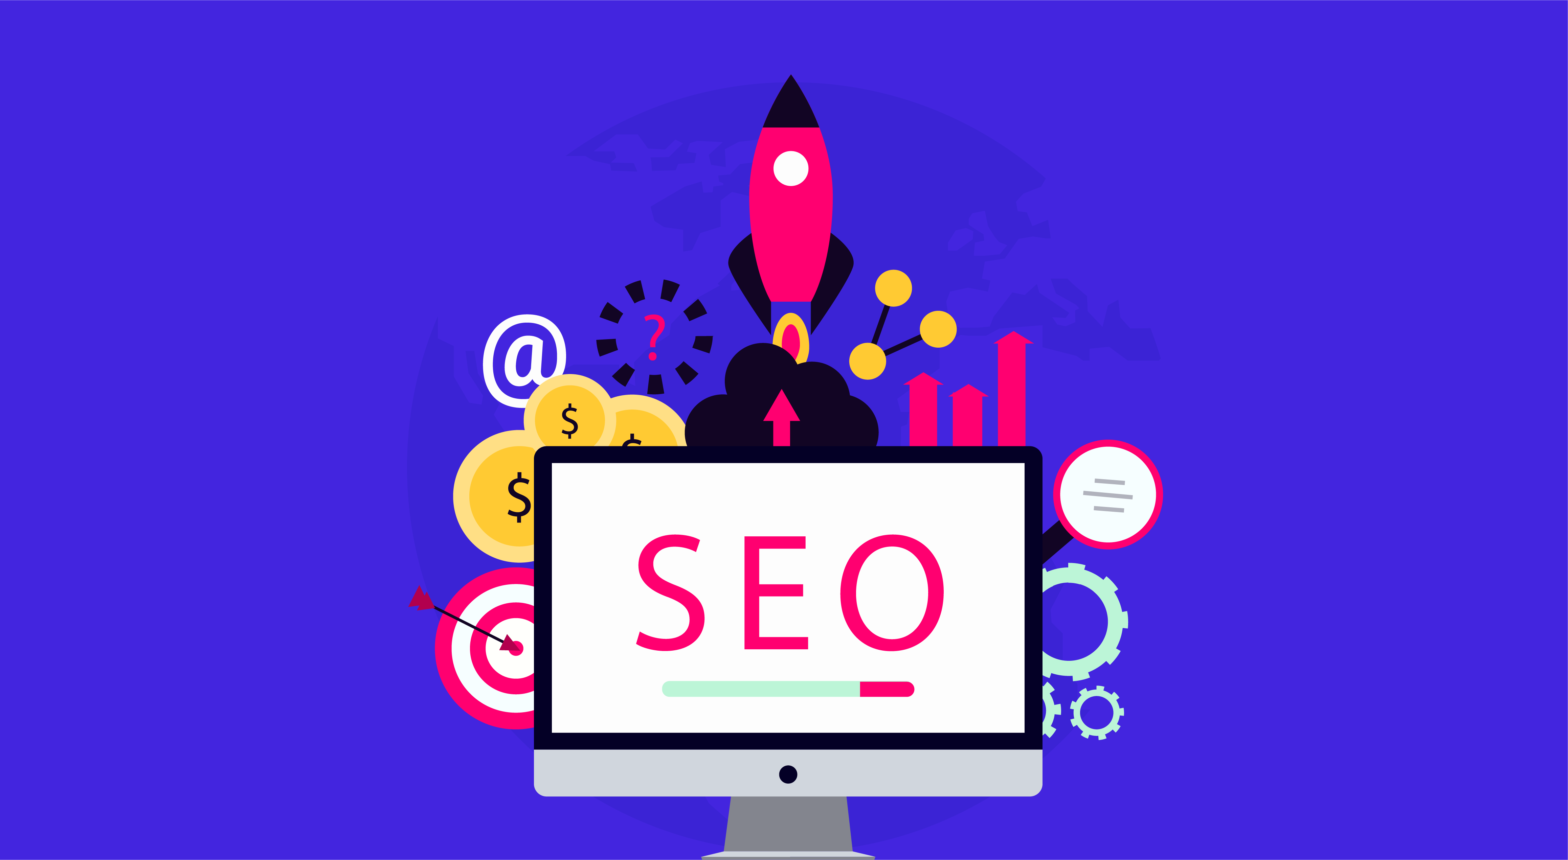 4 Factors That Will Impact SEO in 2022